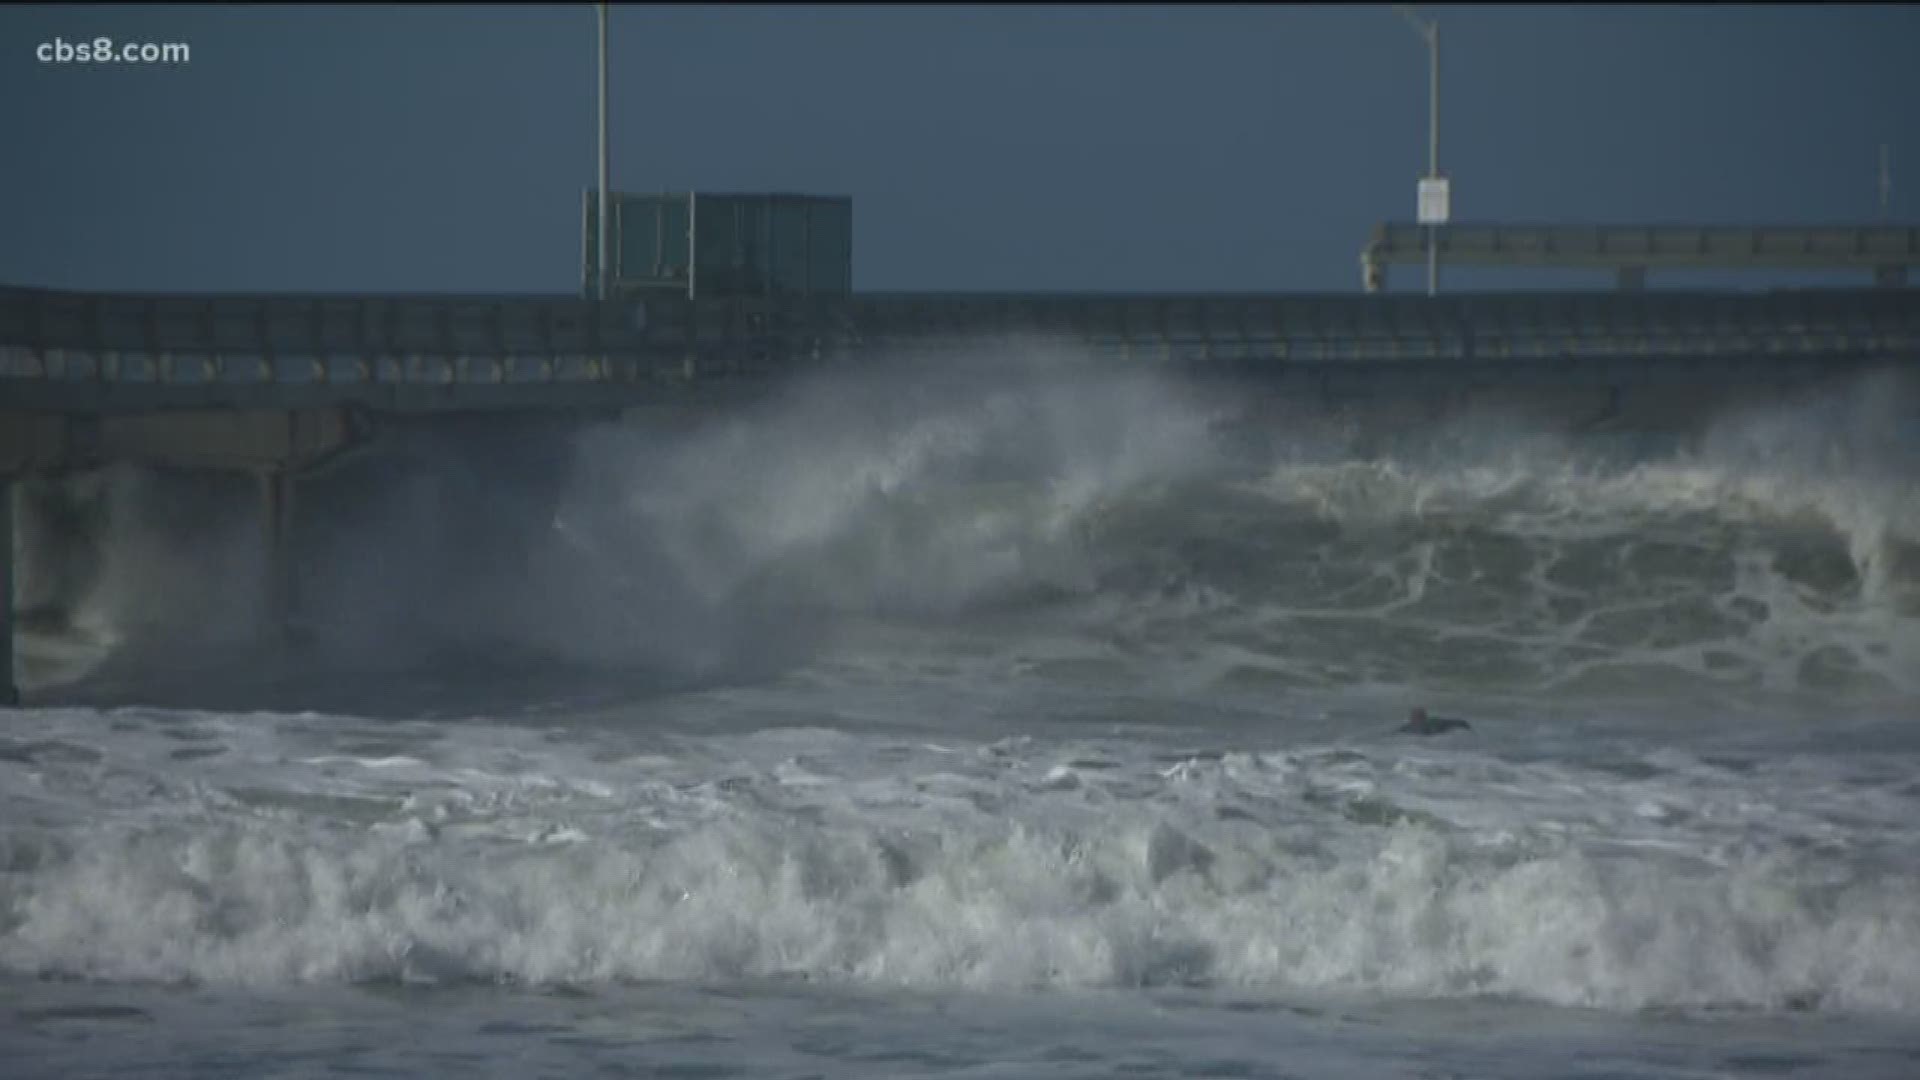 While some surfers are stoked about the swell, others are bummed that they can't walk along the OB pier.